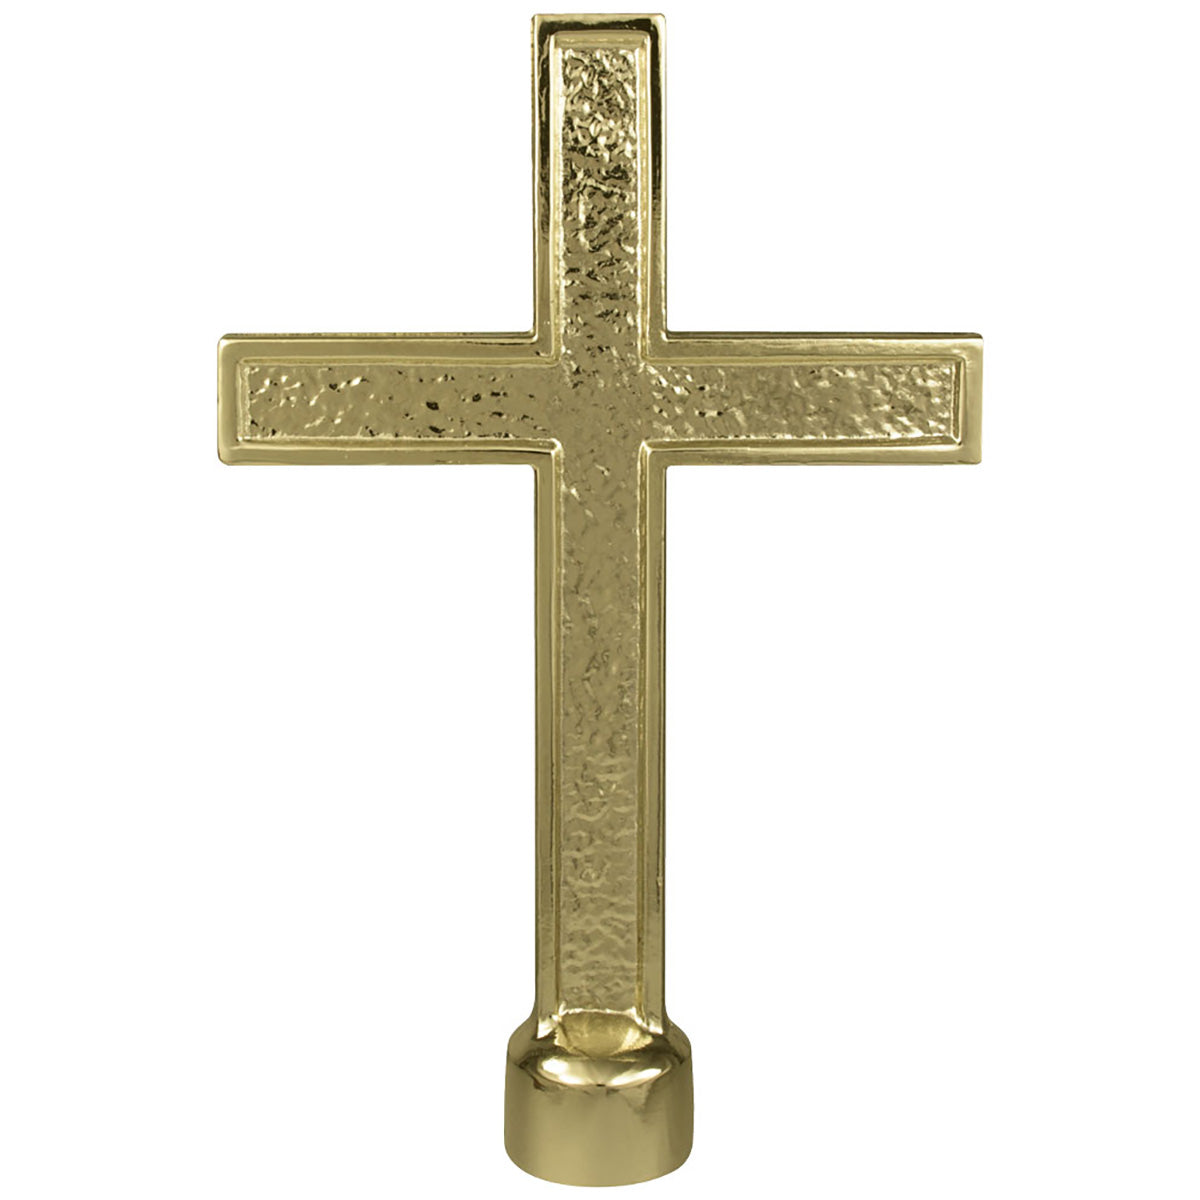 Gold Metal Passion Cross For Indoor Pole With Top Adapter